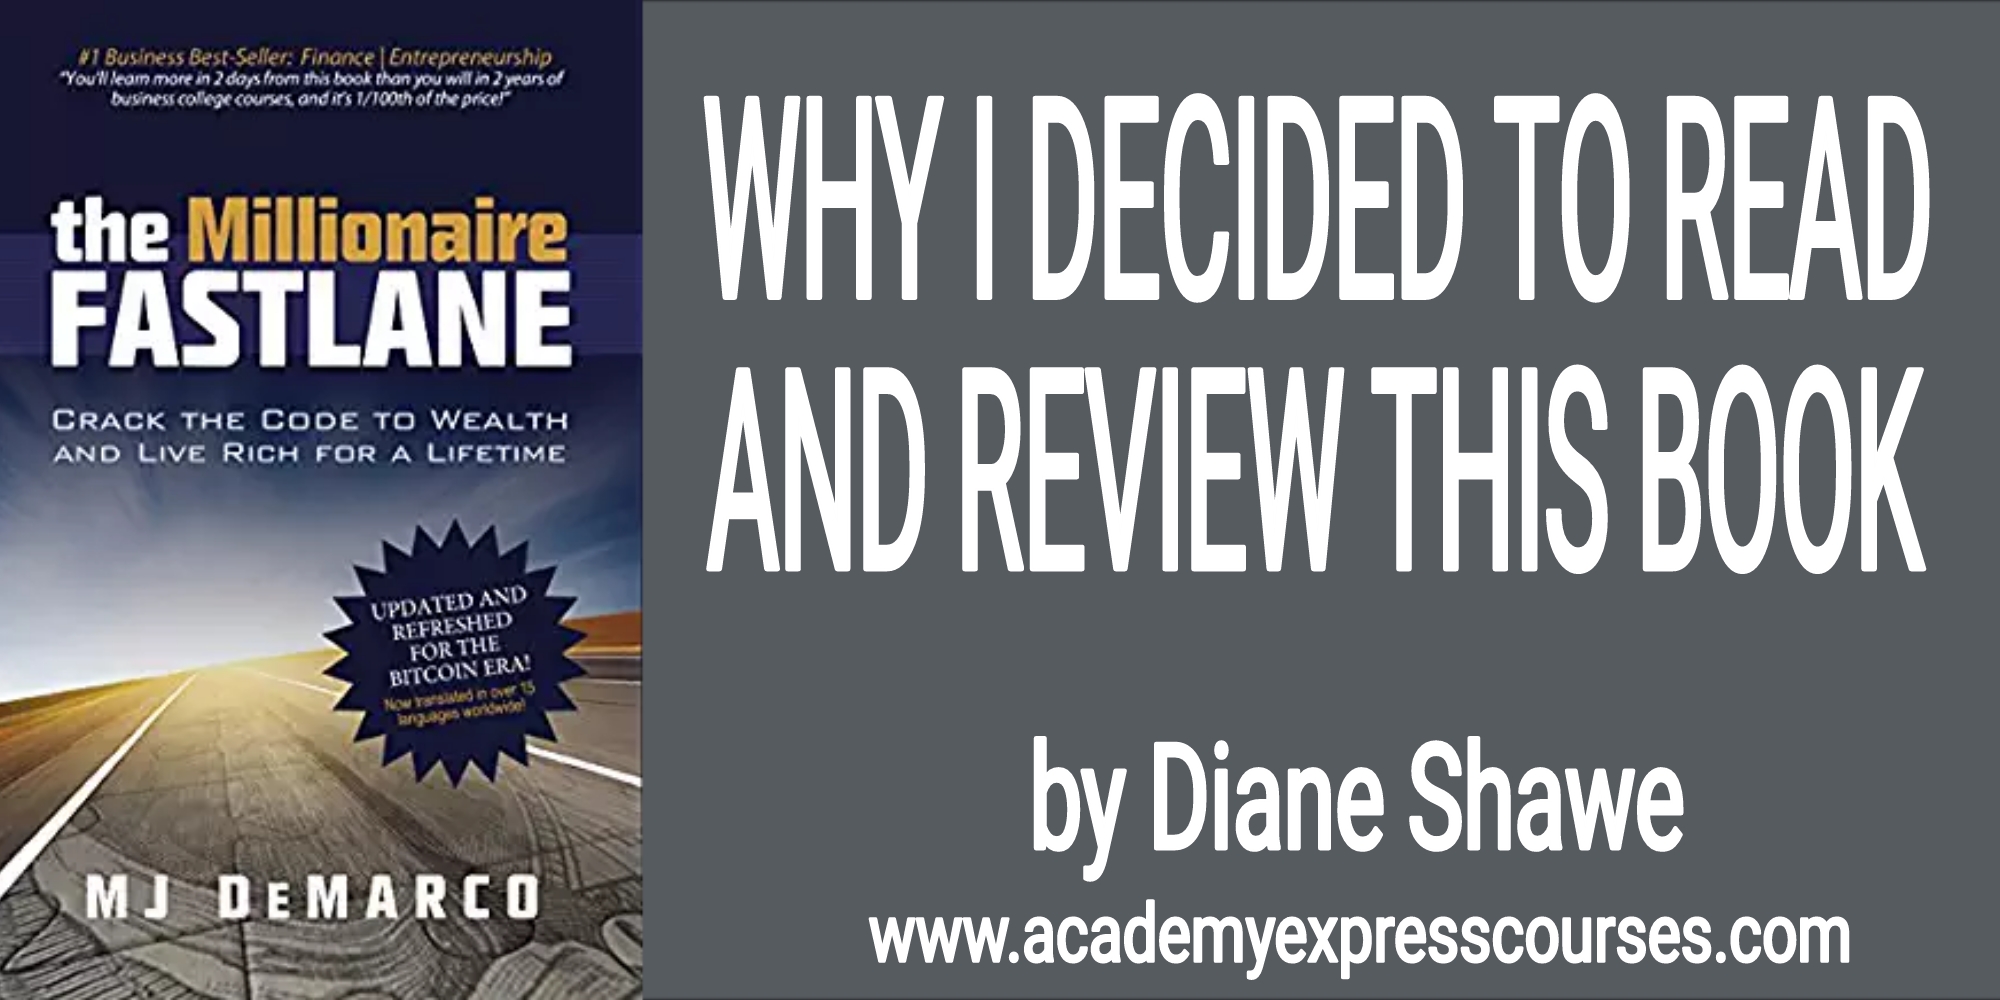 The Anatomy of a Budding Millionaire by Diane Shawe